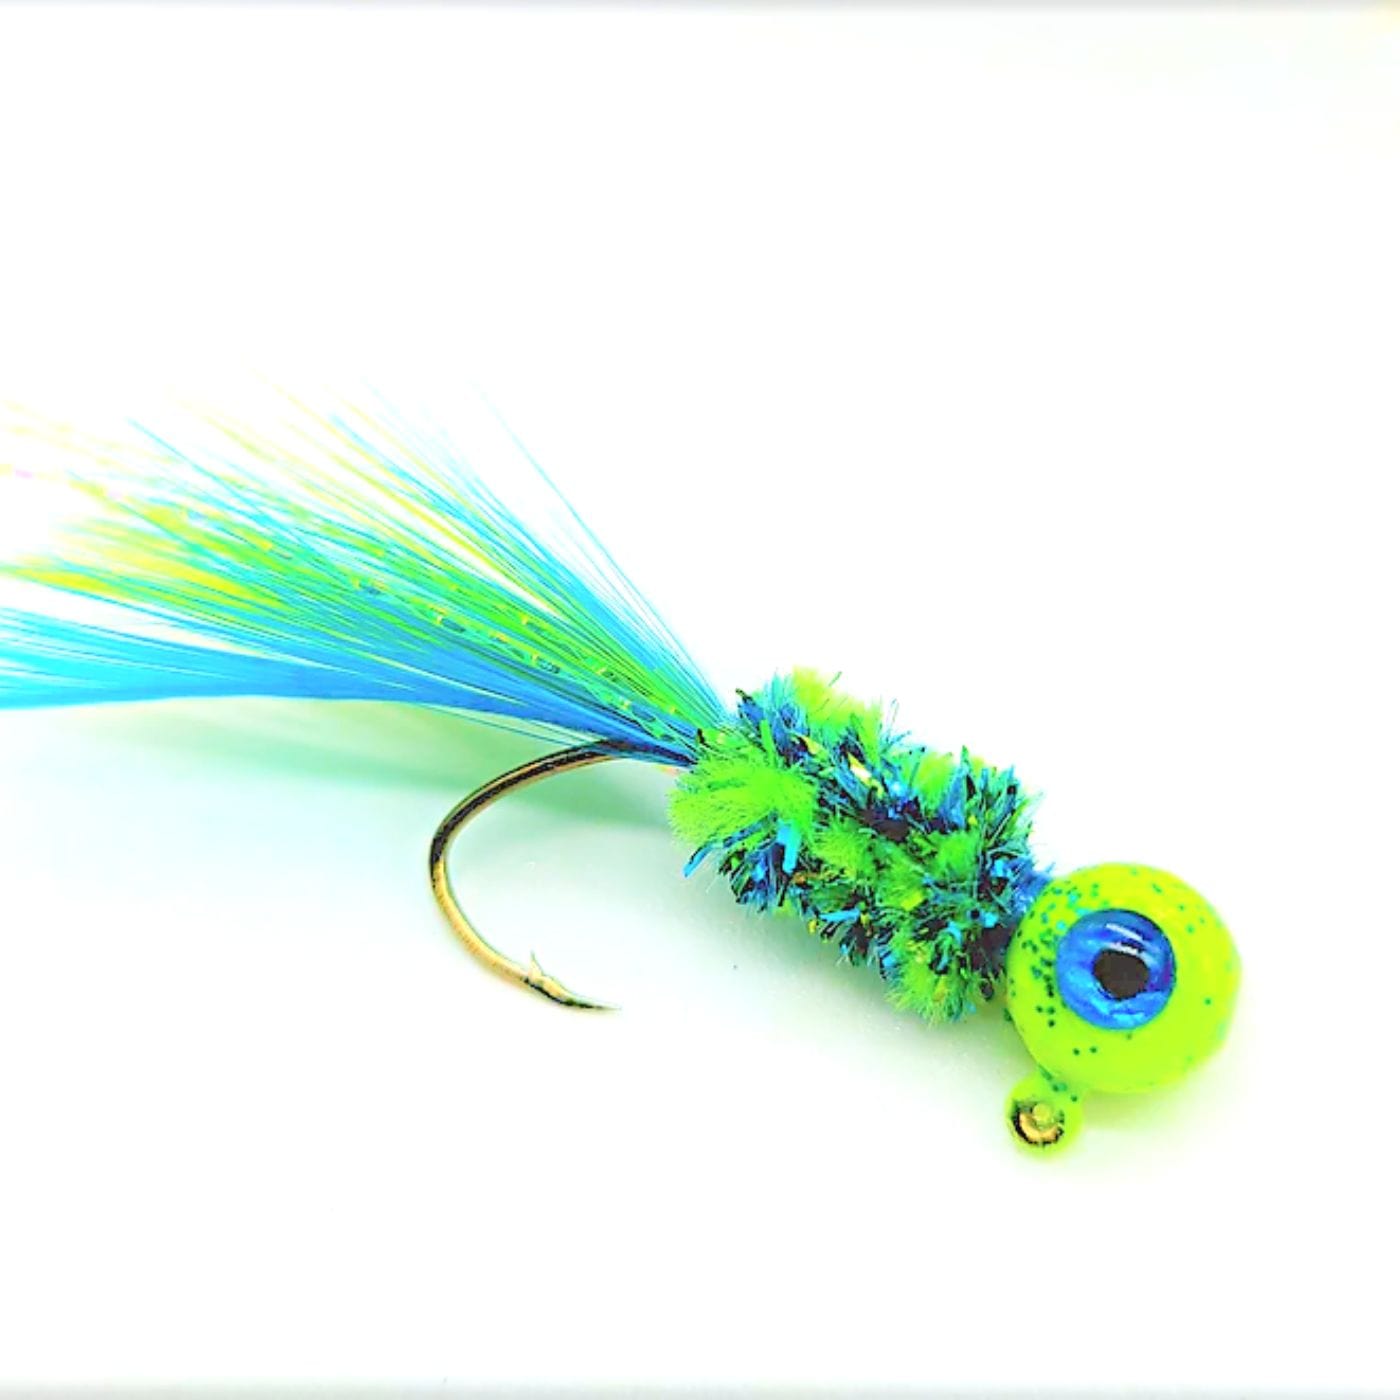 Hand tied Crappie jig featuring a custom Green chartreuse and blue flake head, blue 3D eyes, Chartreuse and blue body chenille,chartreuse and blue hackle tail, and blue flash. Hand tied onto a #4 Mustad sickle hook by Ramble Tamble Tackle.